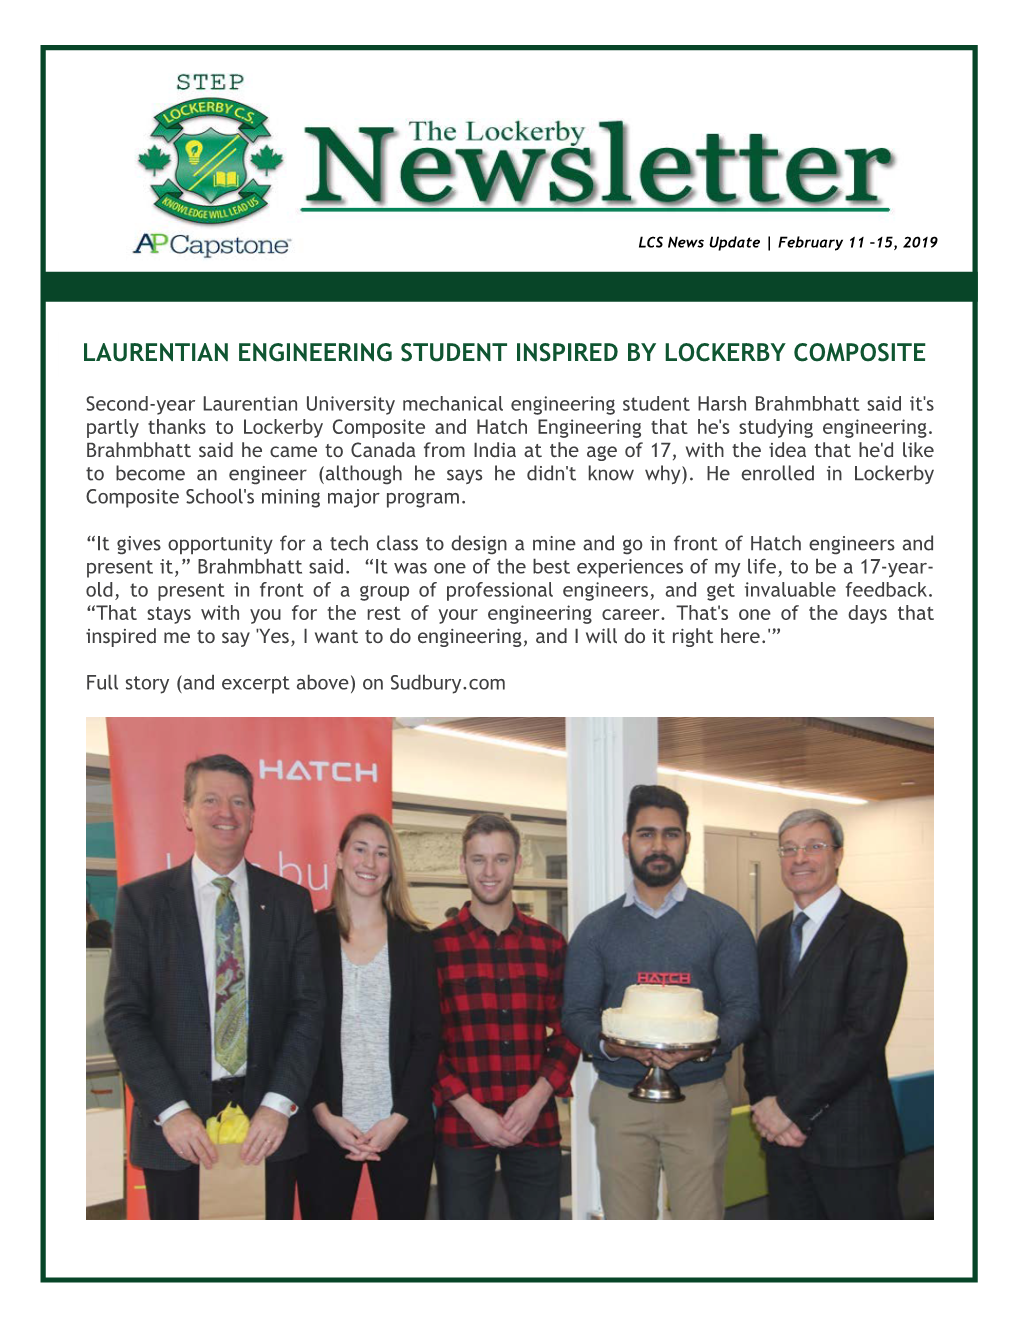 Laurentian Engineering Student Inspired by Lockerby Composite